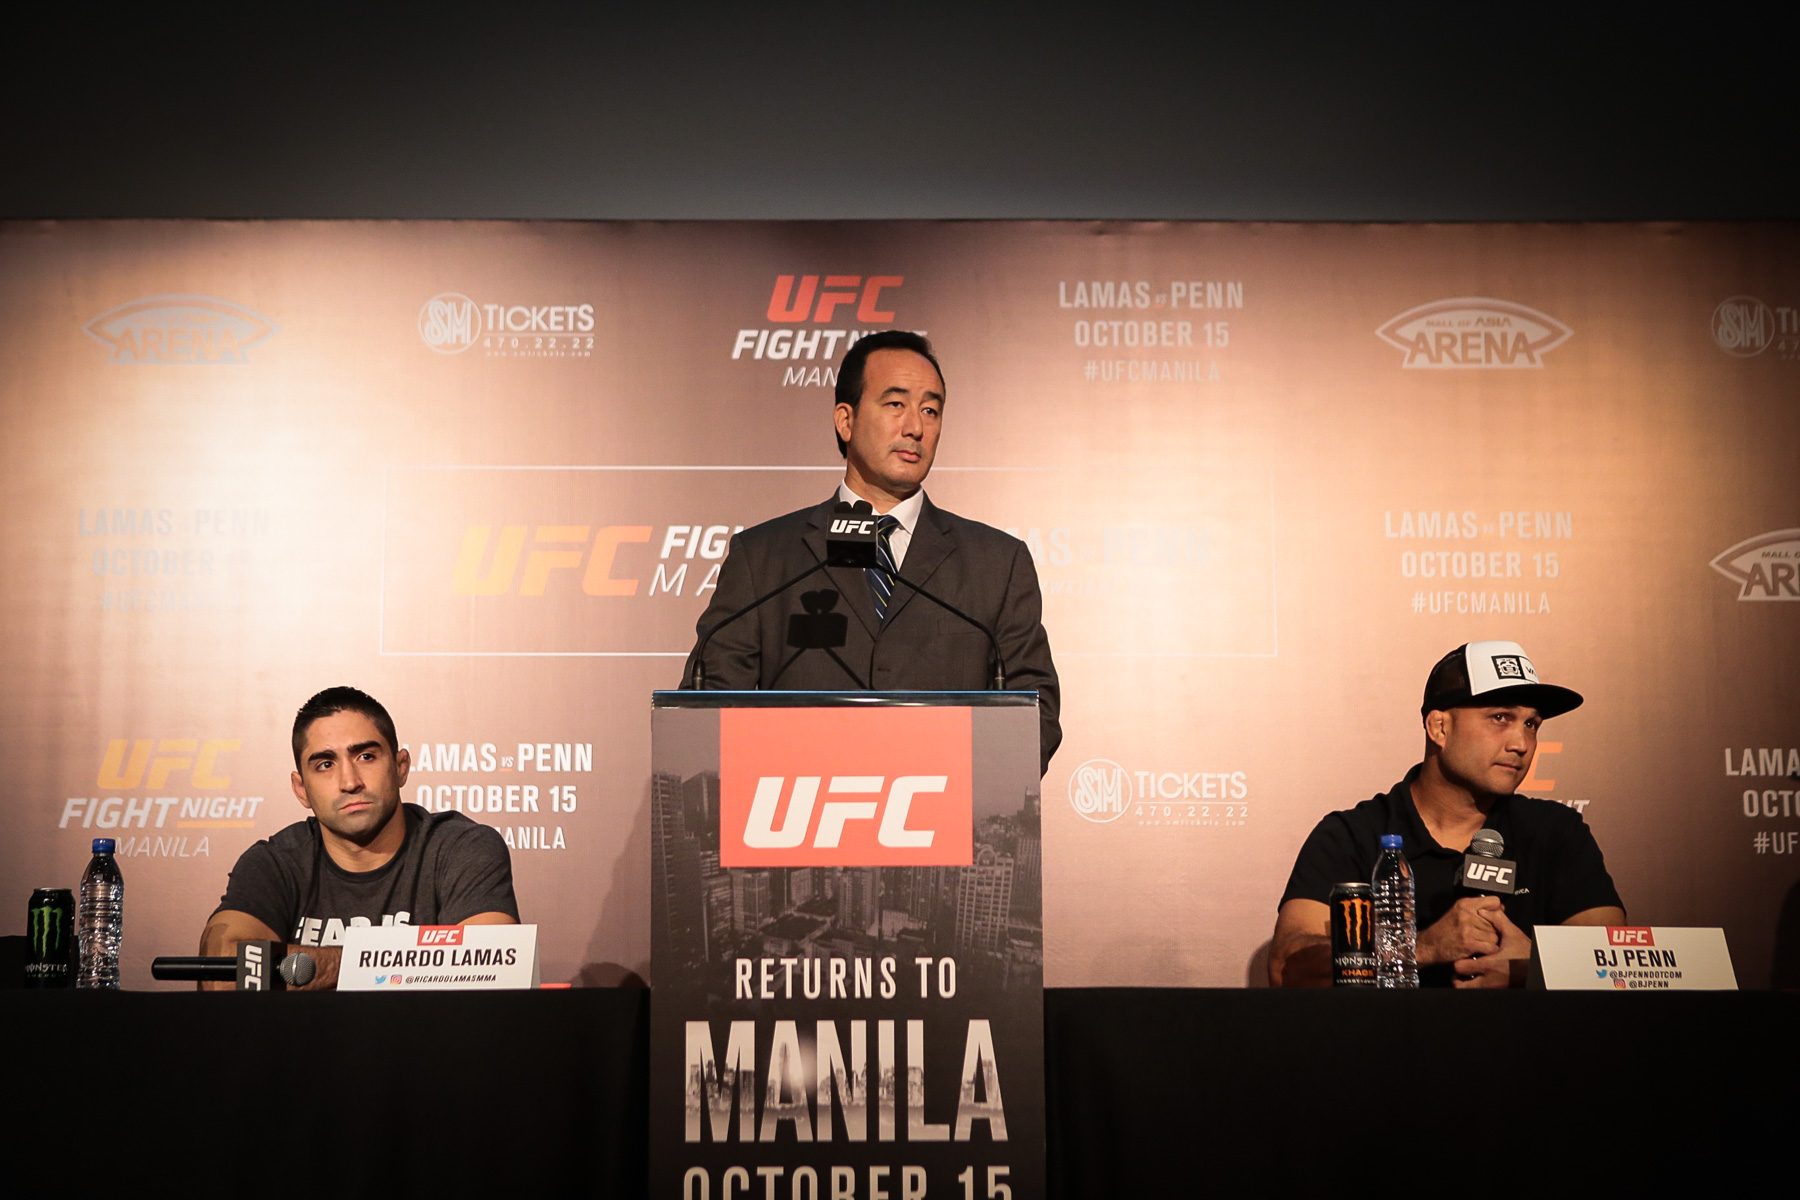 BJ Penn chose to fight in Manila over New York